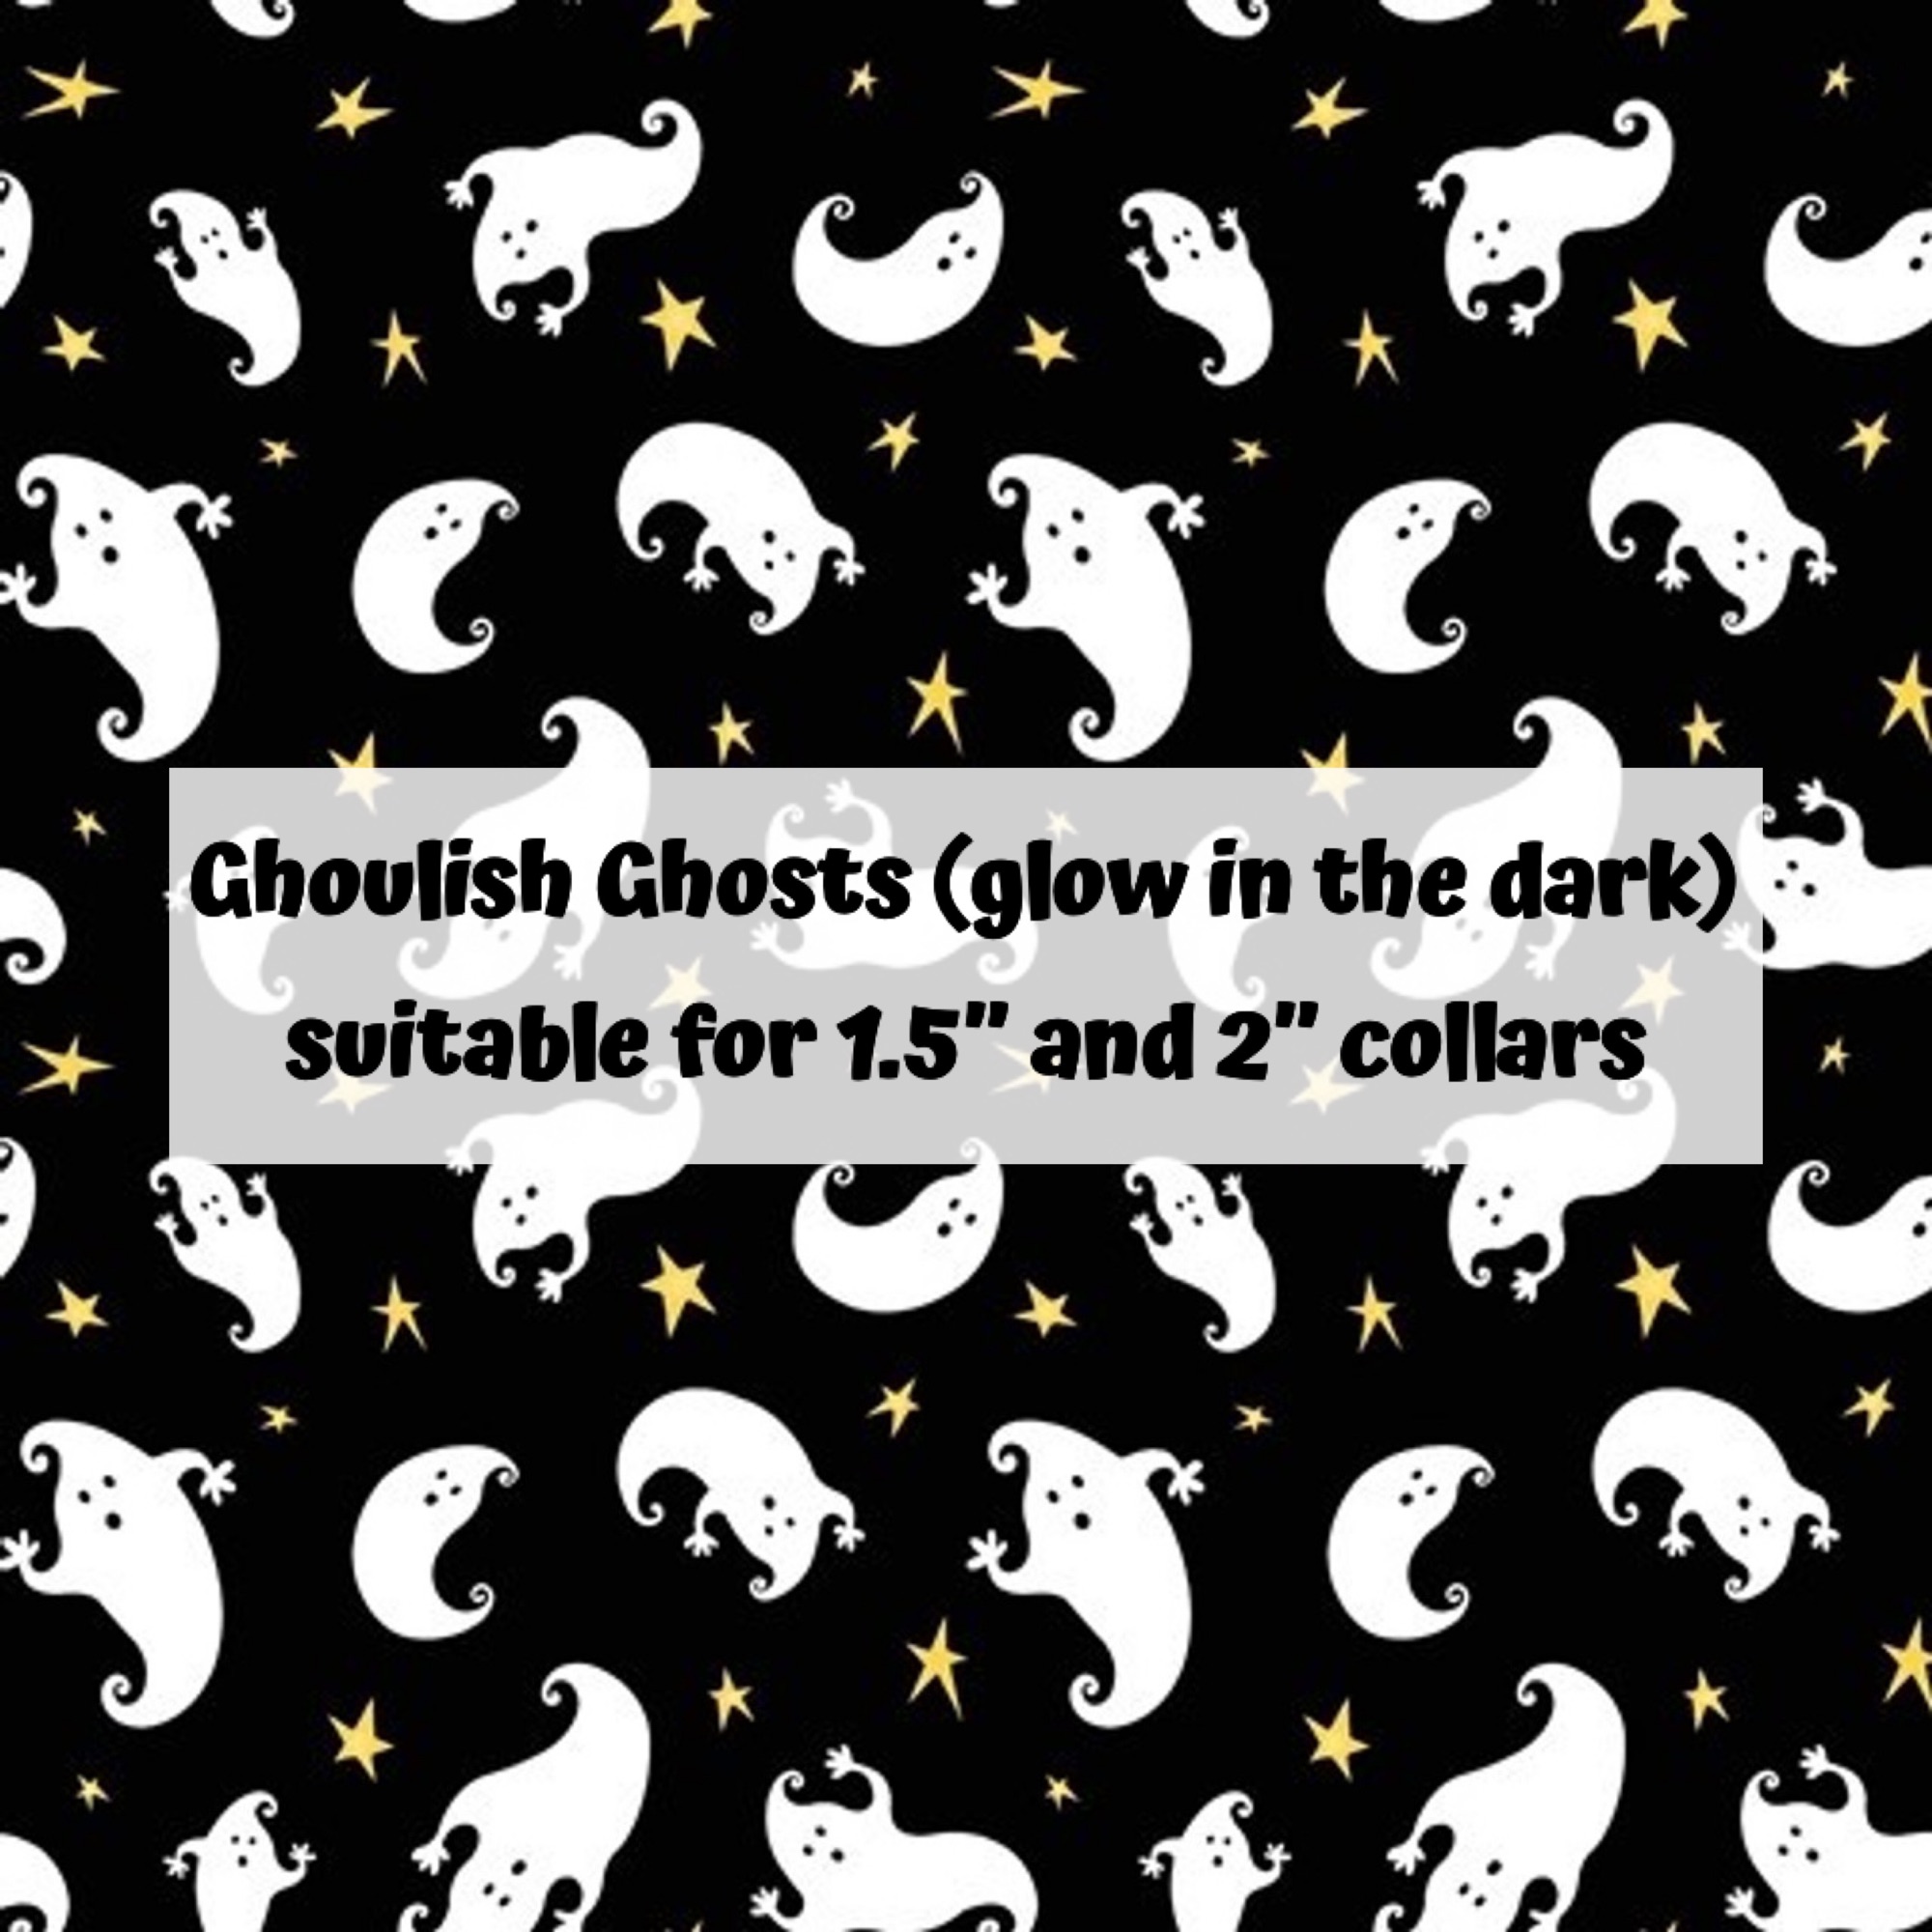 Ghoulish Ghosts (glow in the dark)